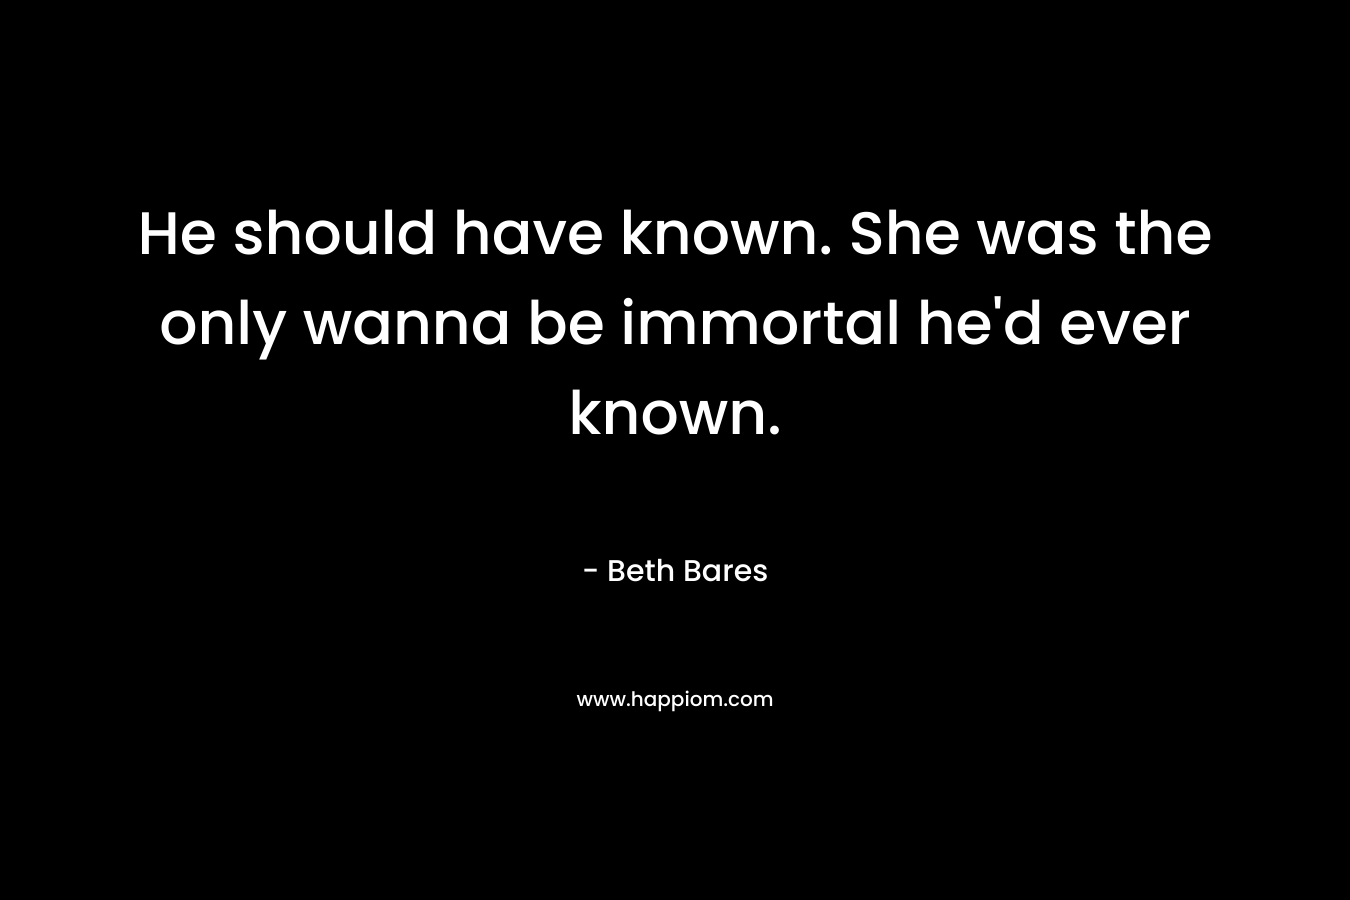 He should have known. She was the only wanna be immortal he'd ever known.